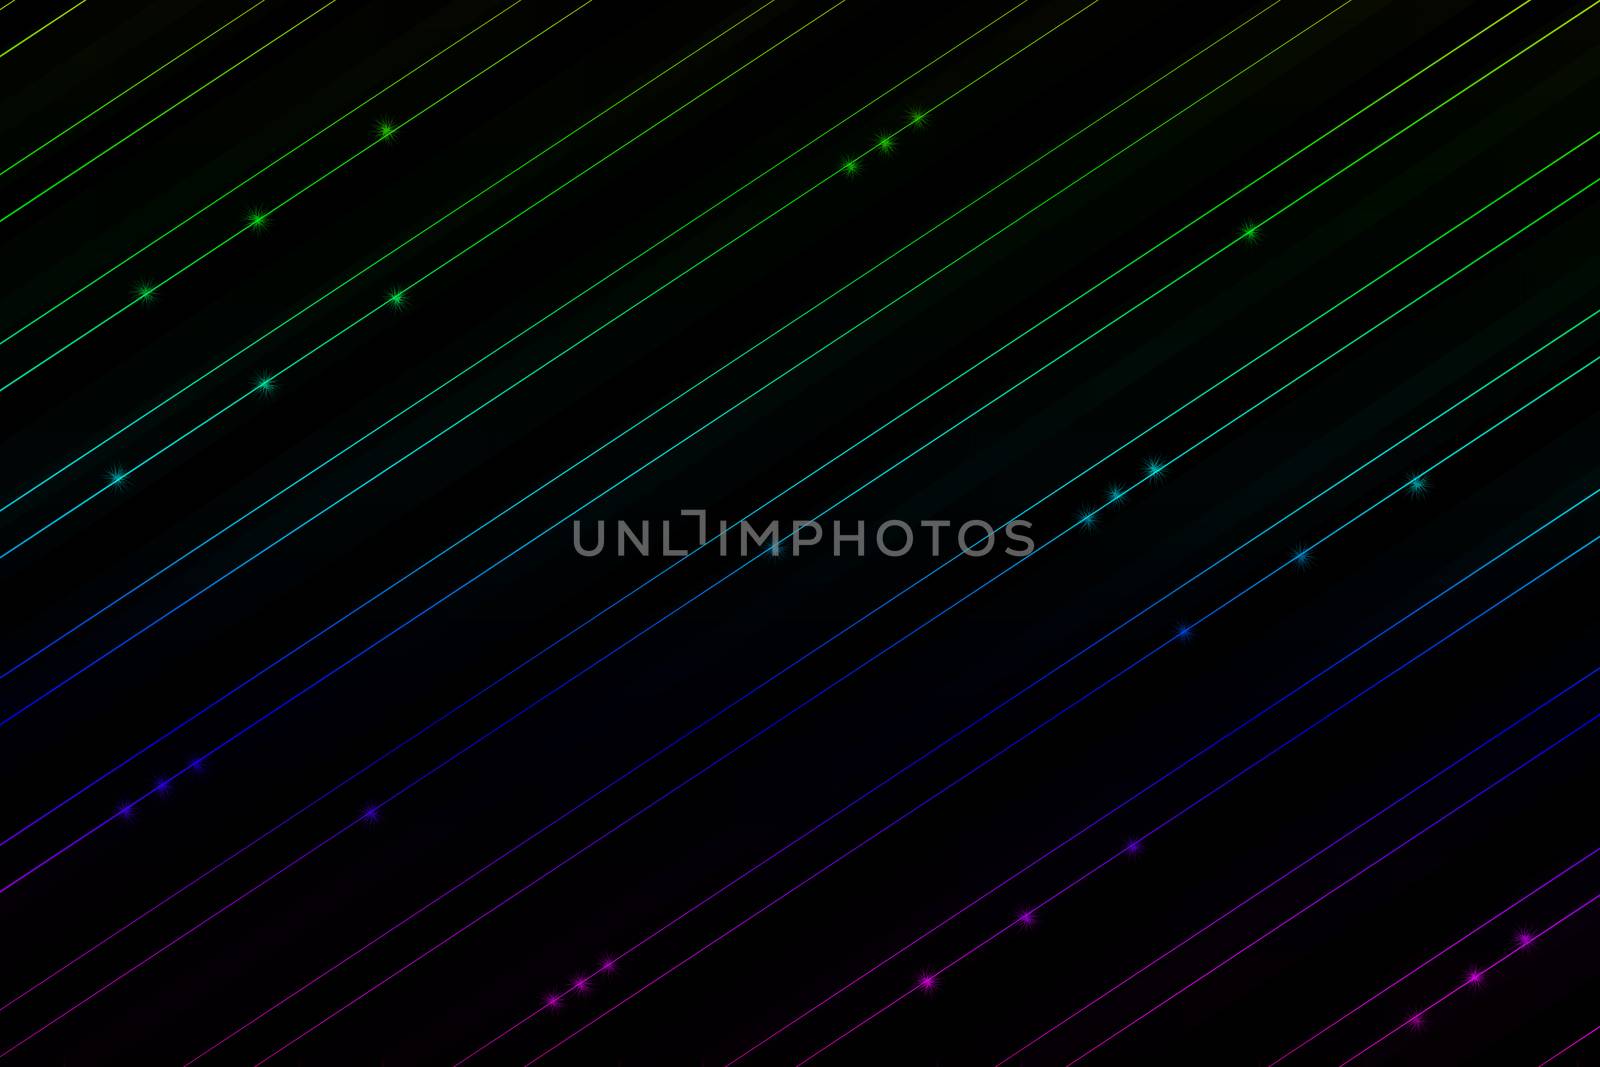 Bright neon abstract background for your design